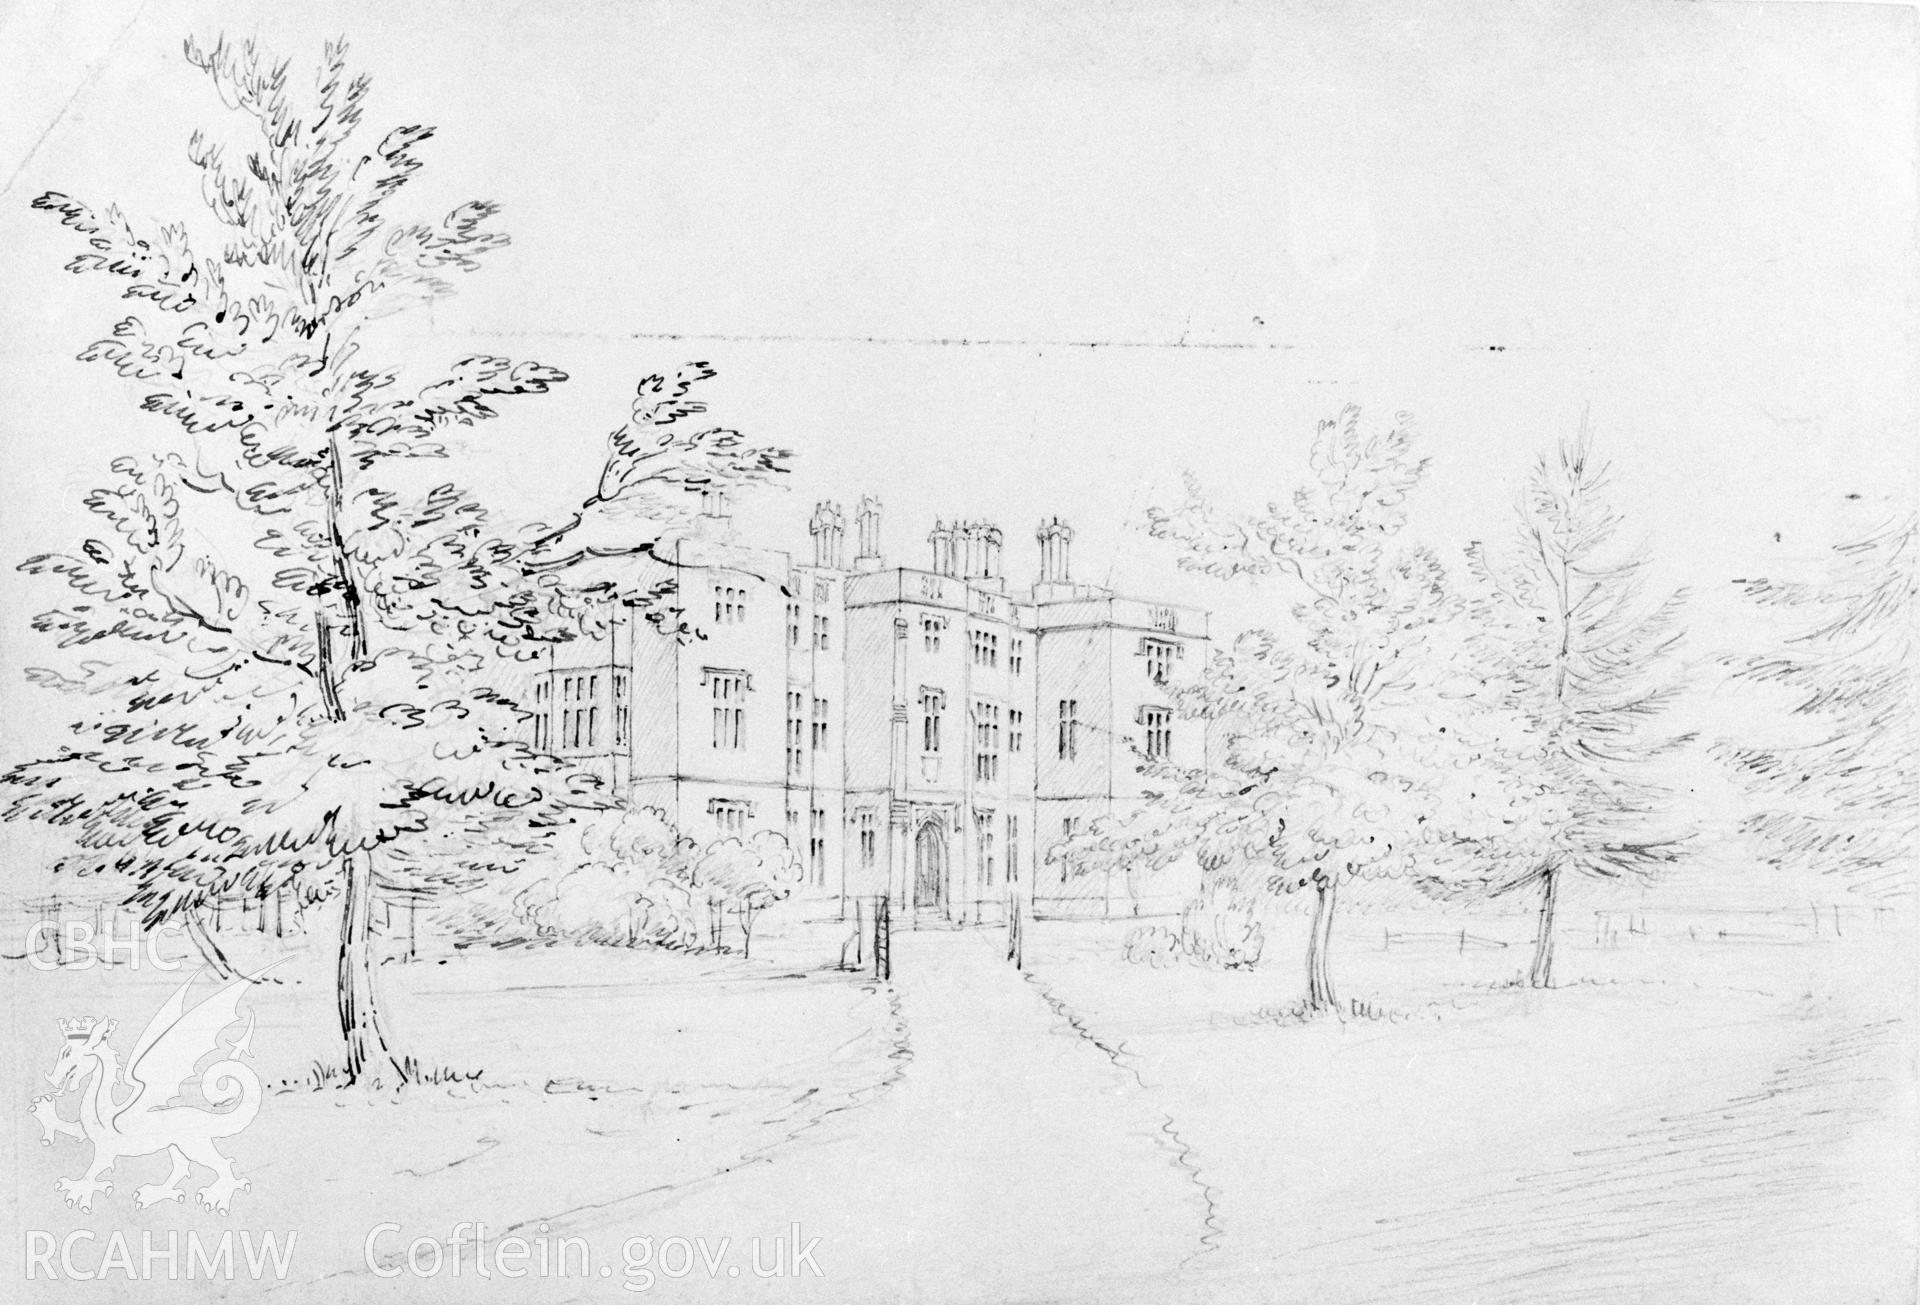 Llanover House; B&W photographic copy of an undated pencil drawing, artist unknown, loaned for copying by Thomas Lloyd, copy negative held.